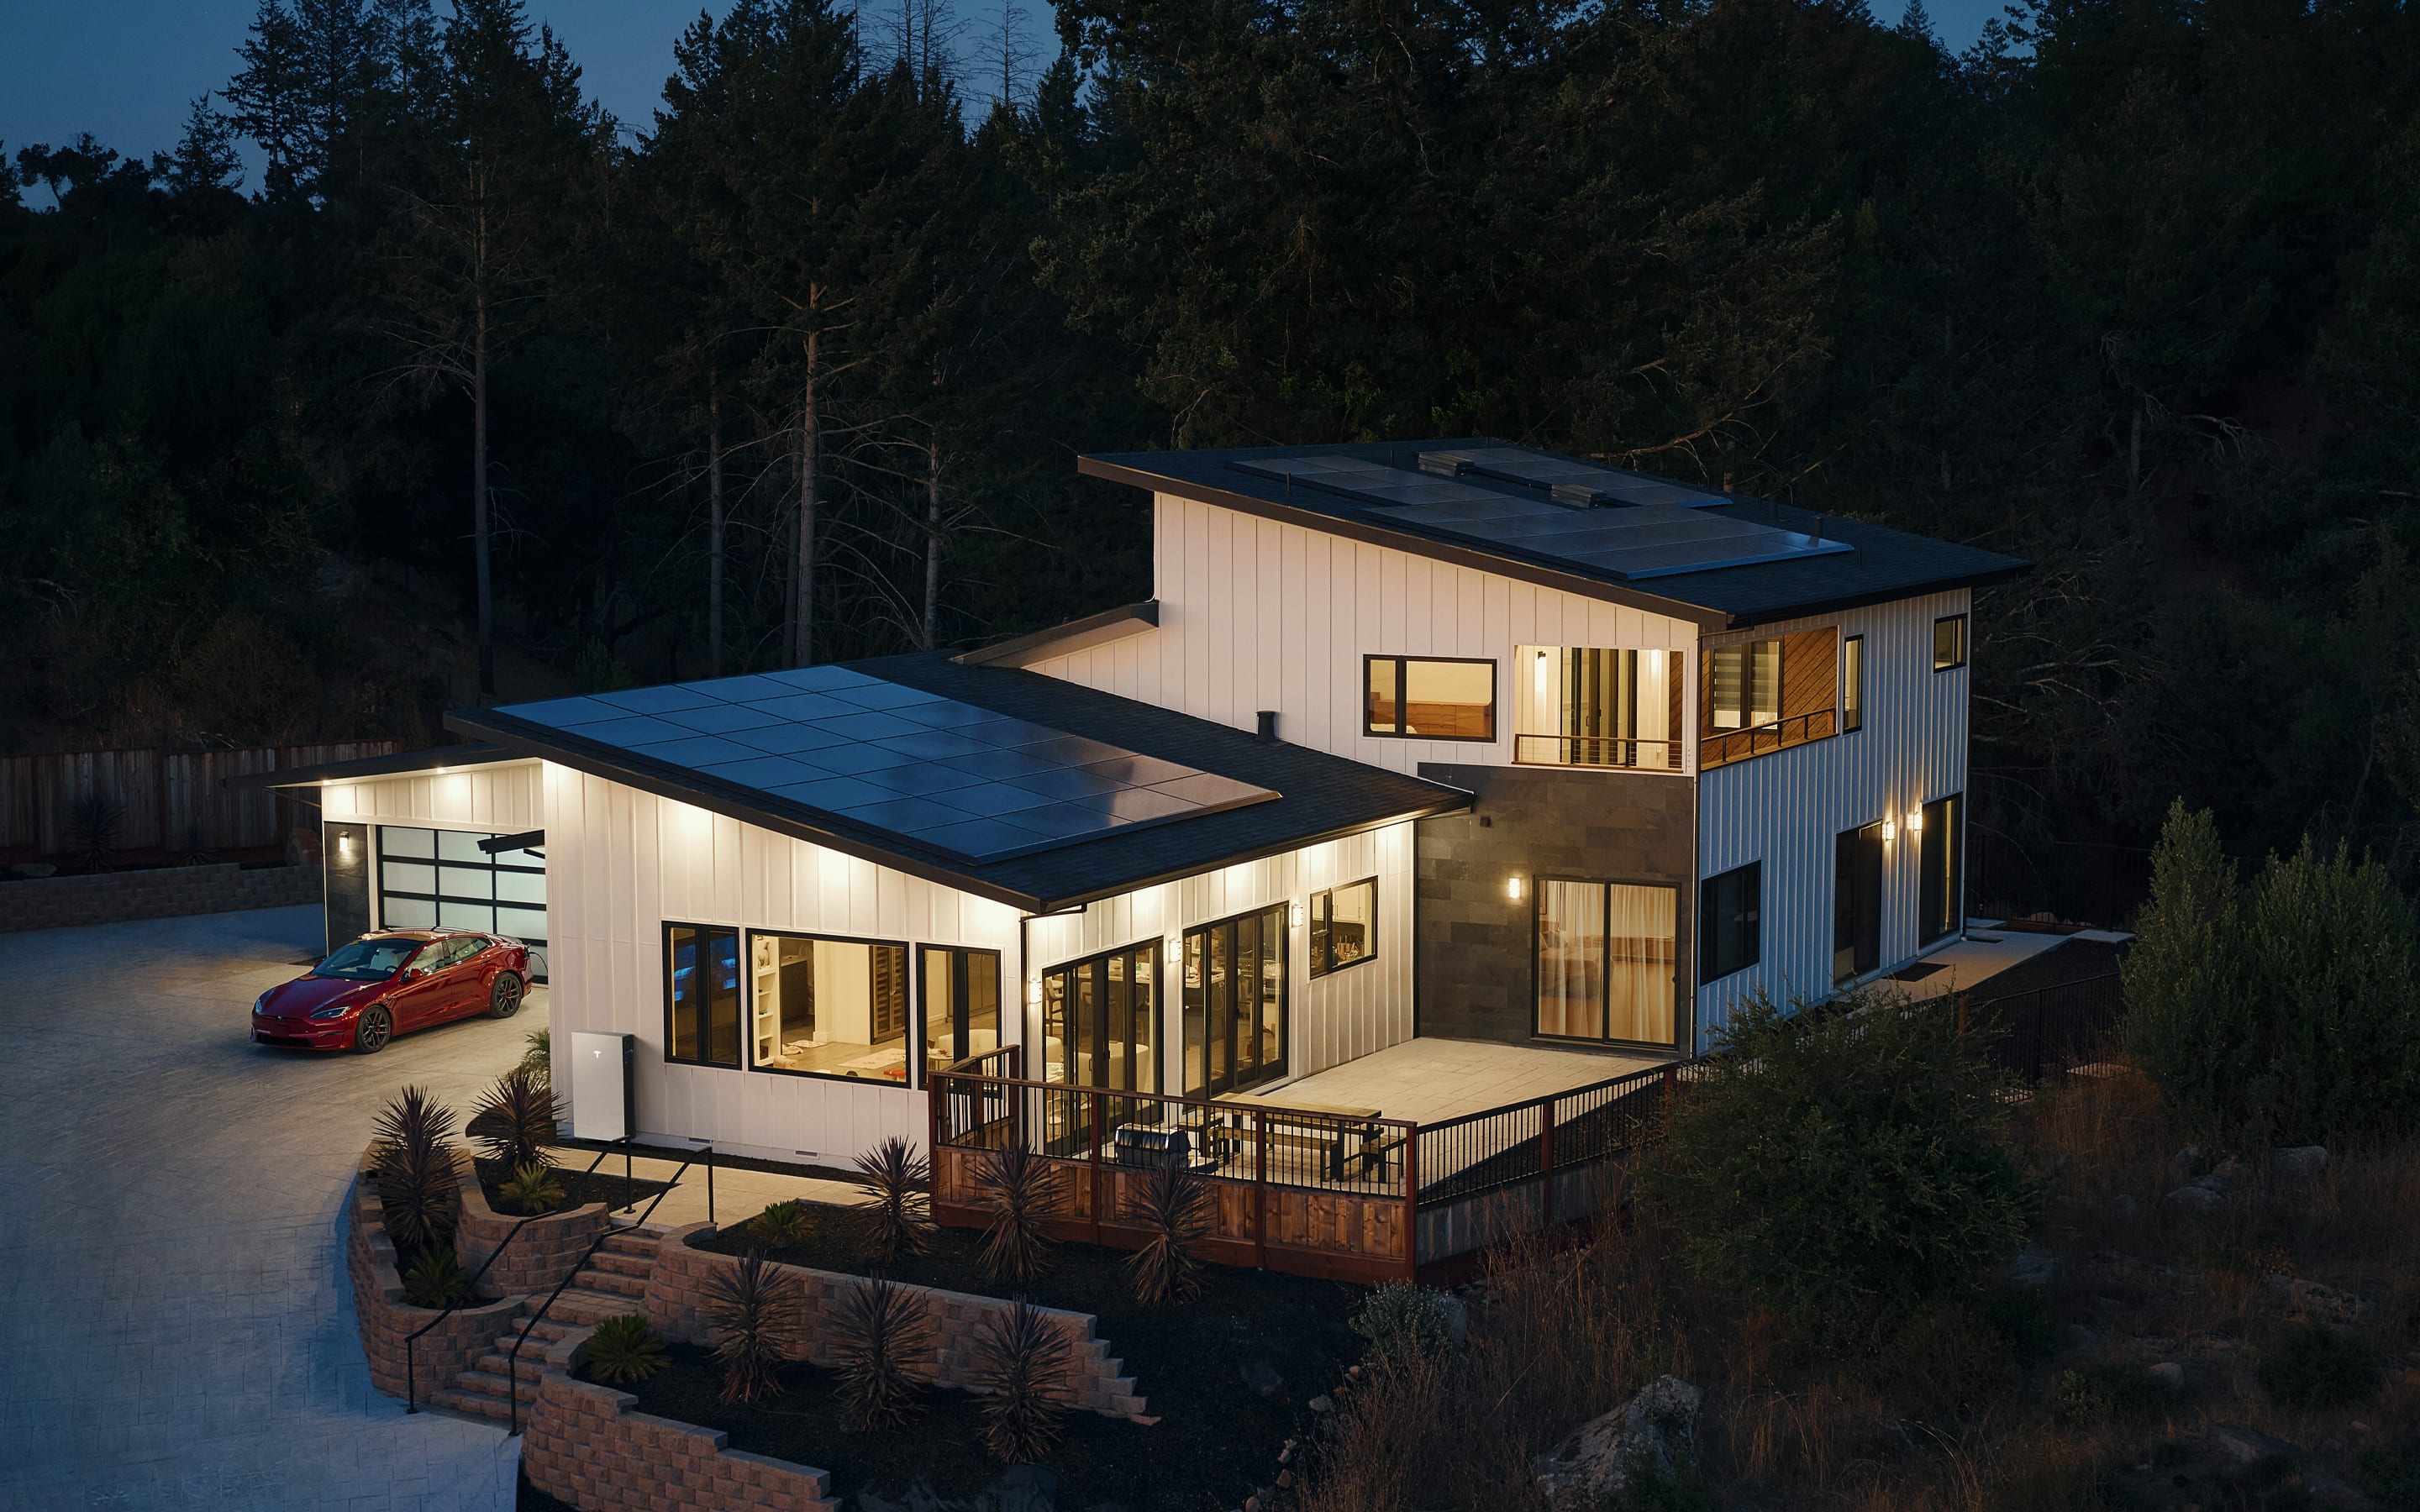 Ranch style home powered by Tesla solar panels and Powerwall